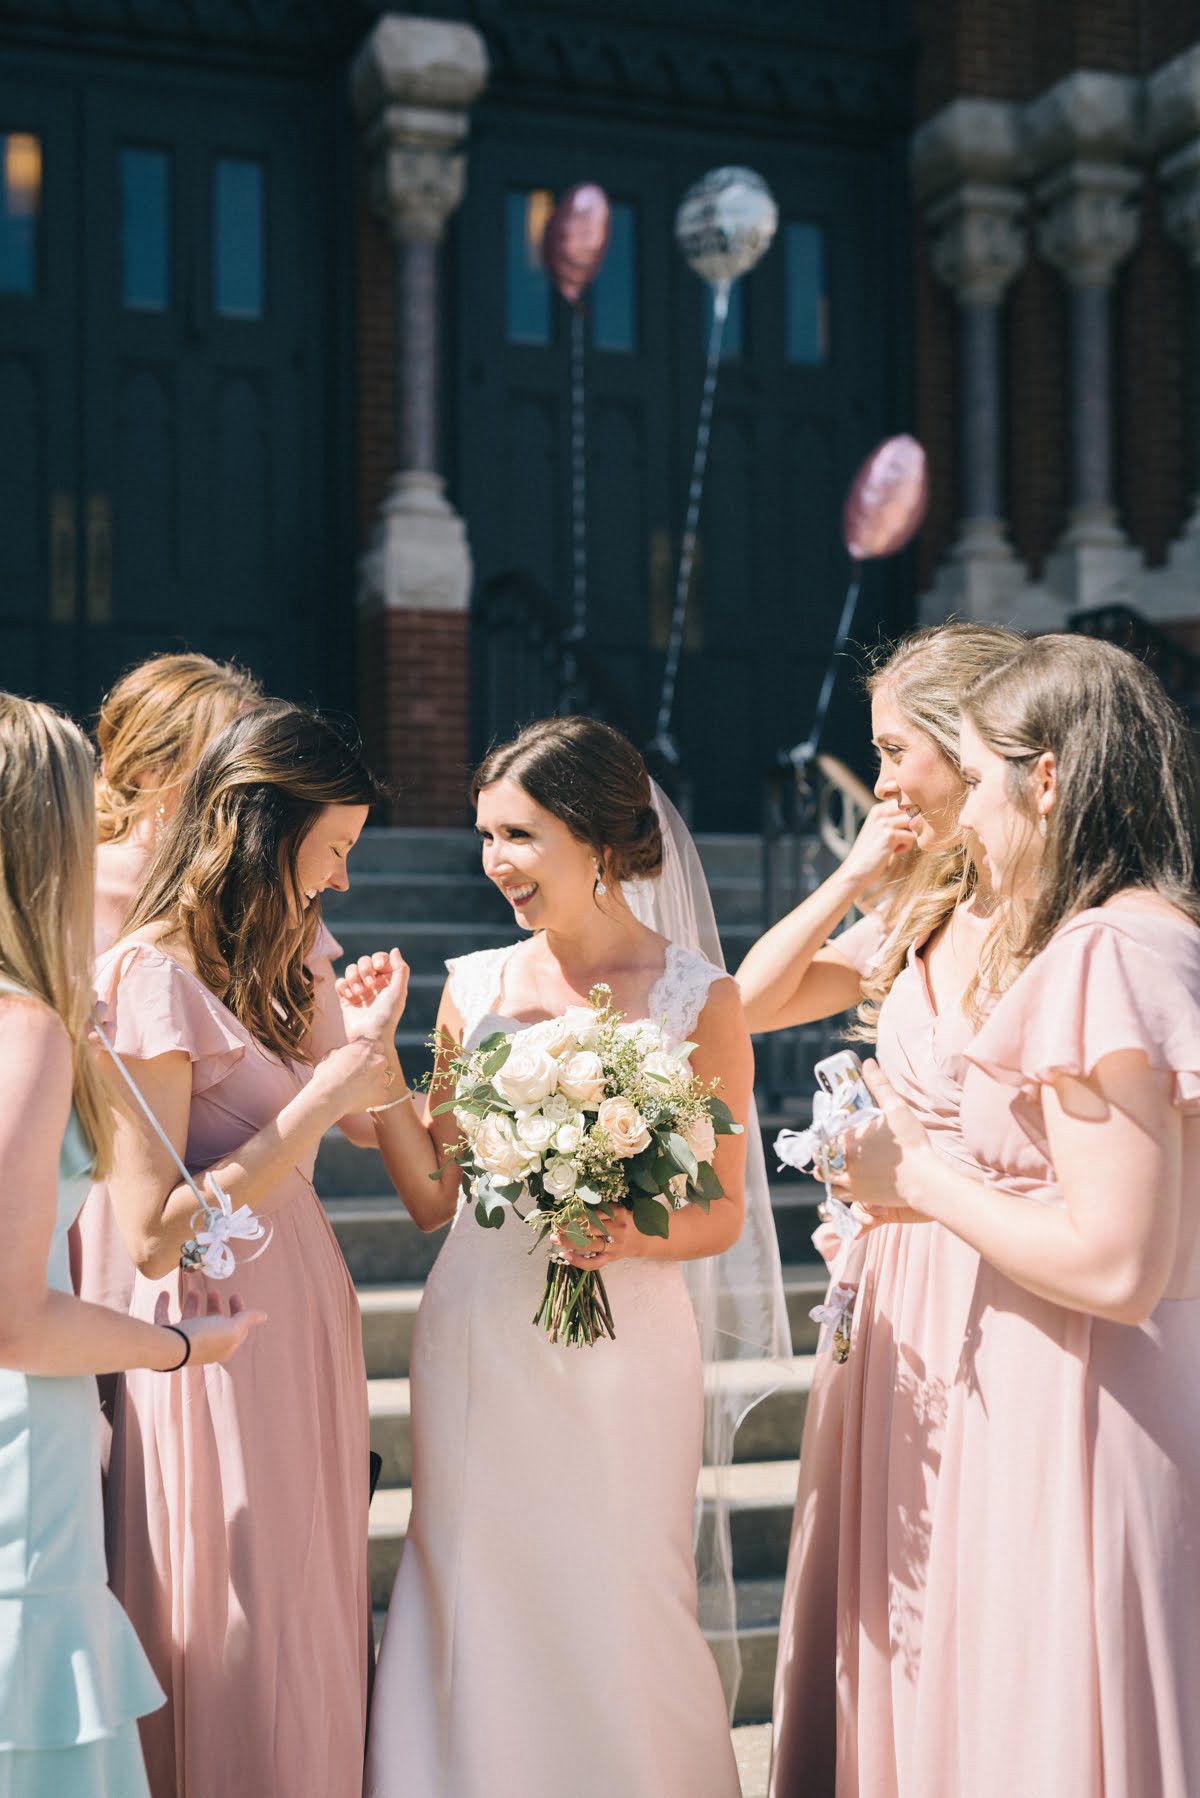 A candid image of joyful bridesmaids surrounding the bride who just got married in front of Cathedral of St Paul's Birmingham, AL